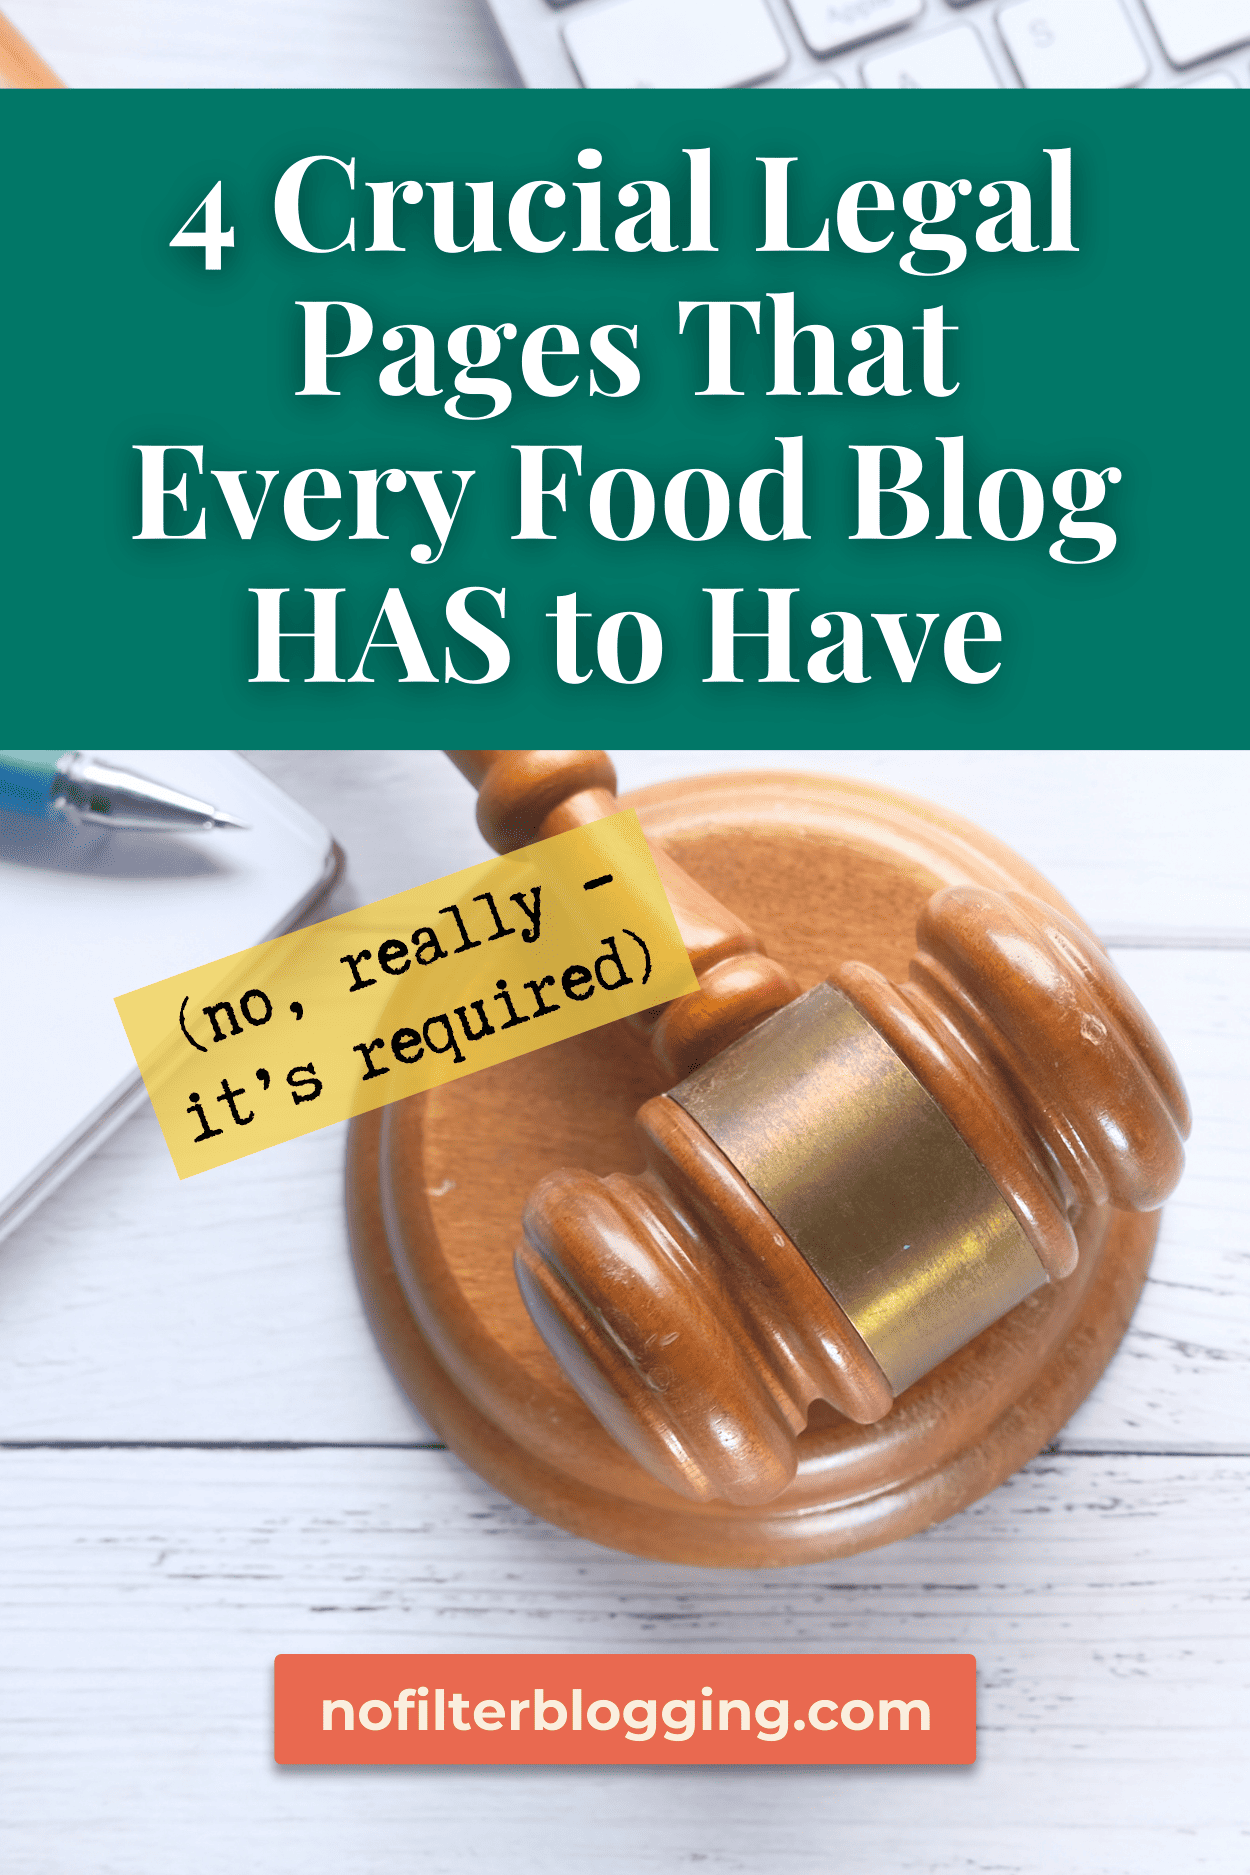 4 Crucial Legal Pages That Every Food Blog Should Have Pinterest image